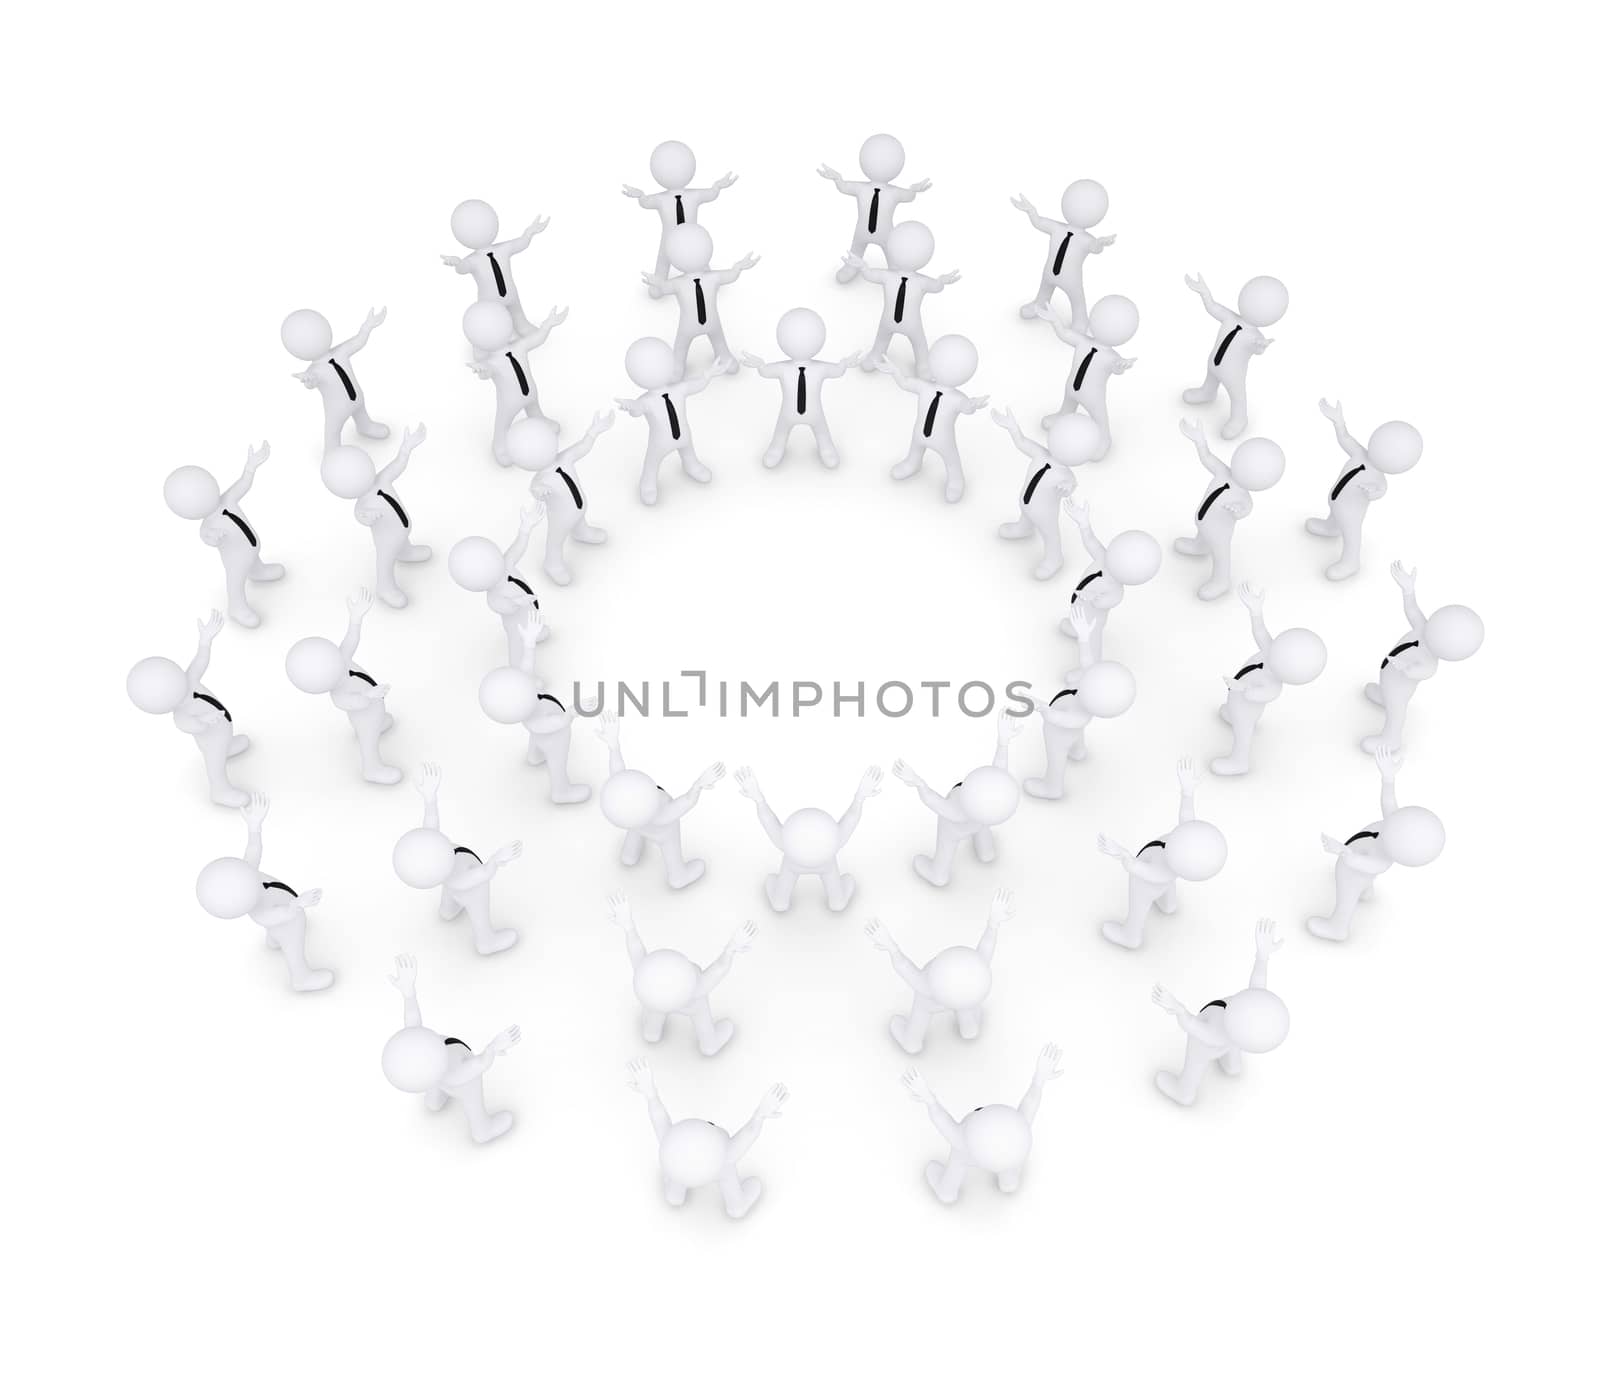 Group of white people raised their hands. 3d render isolated on white background